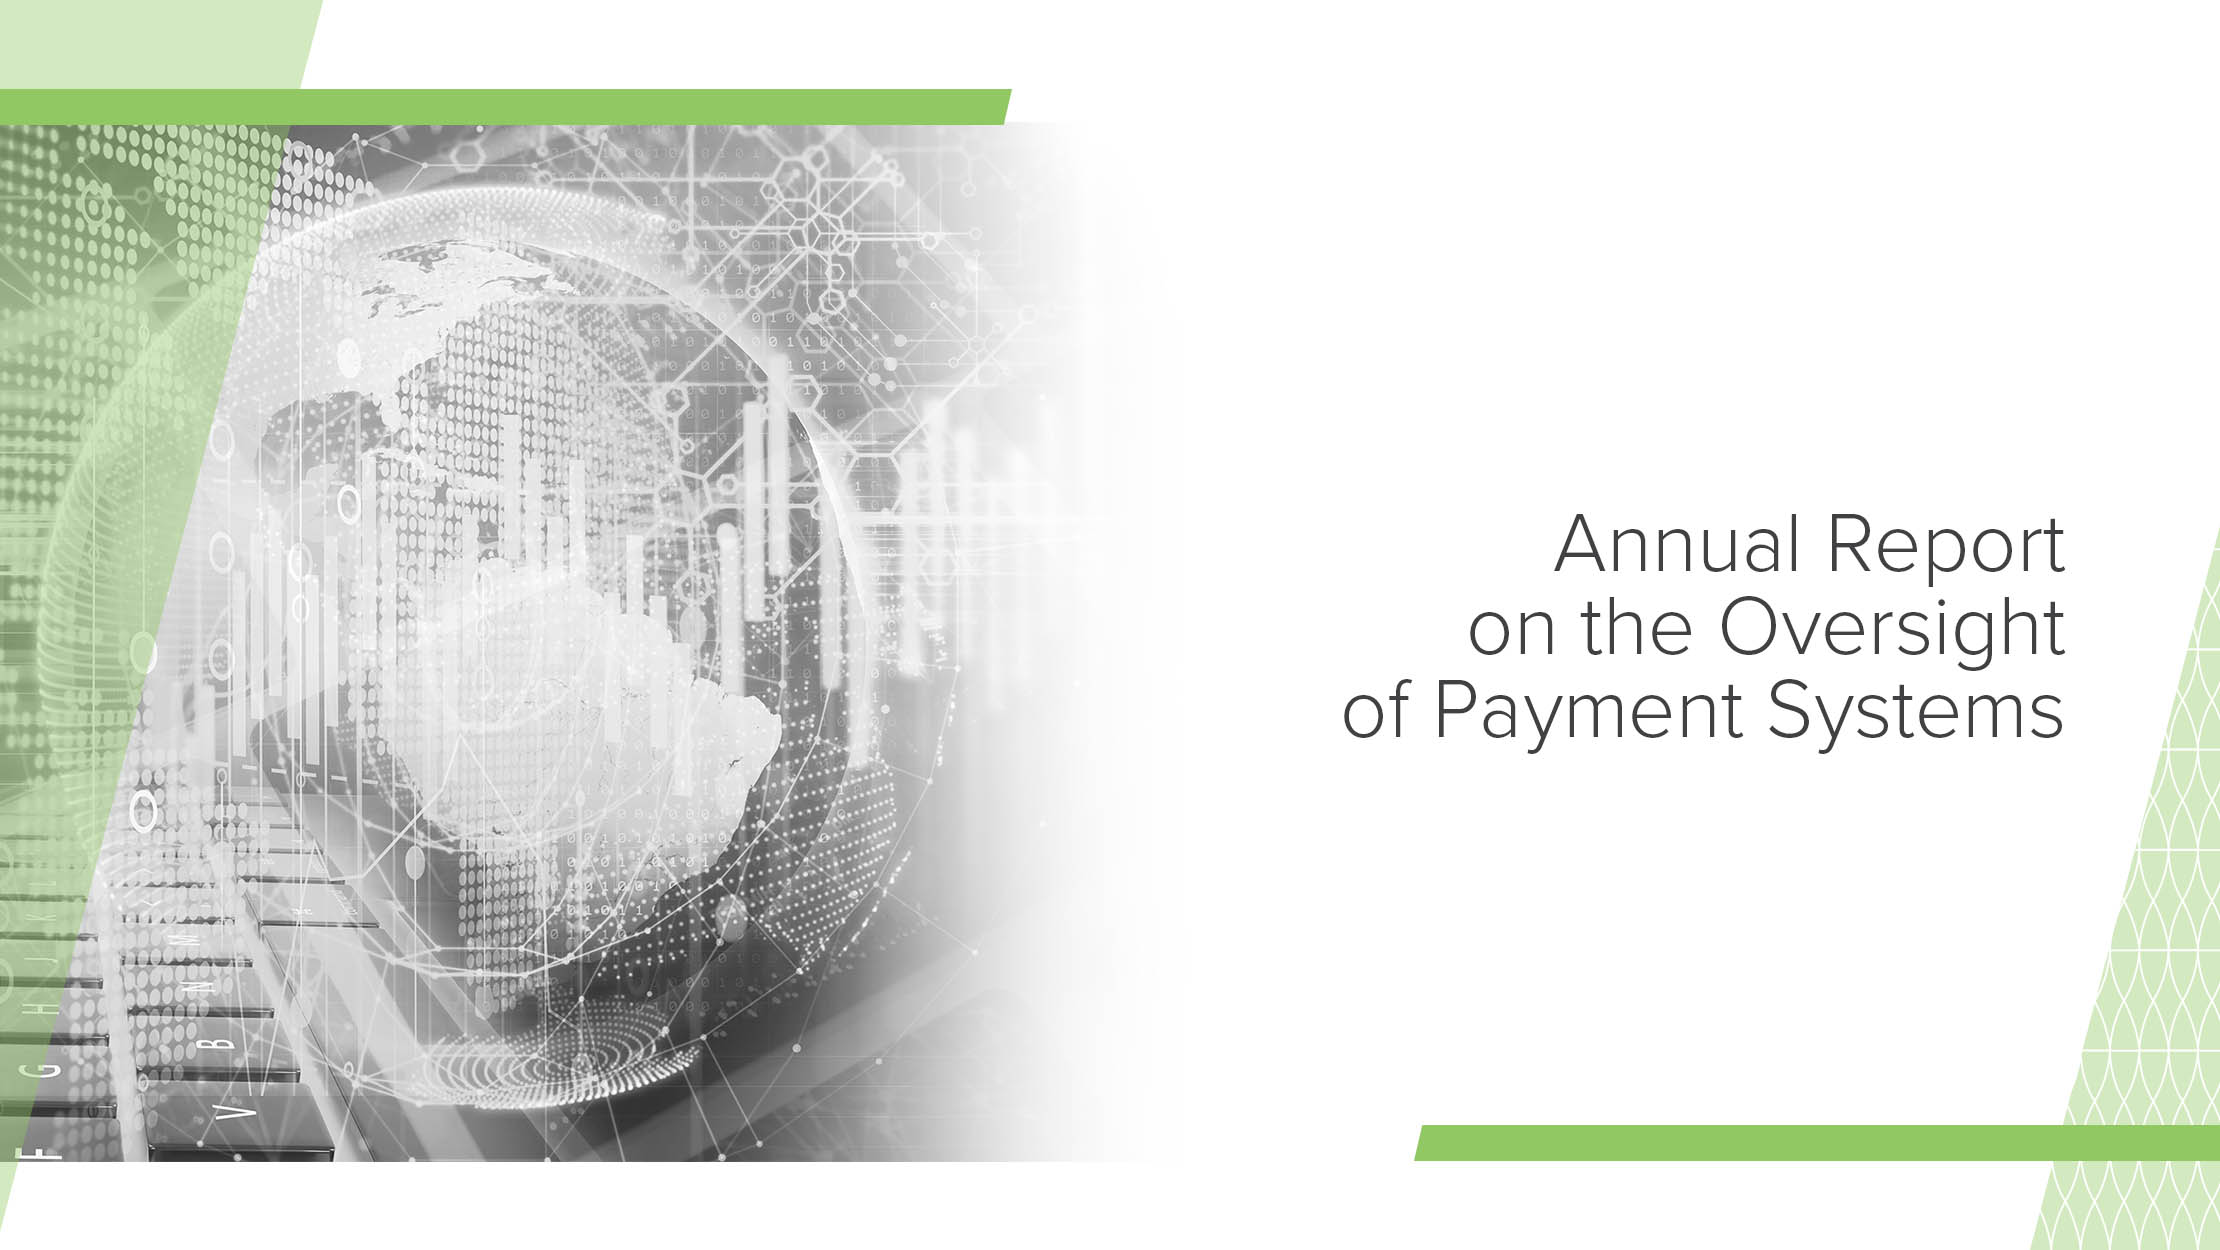 For the First Time the NBU Publishes the Annual Report on the Oversight of Payment Systems